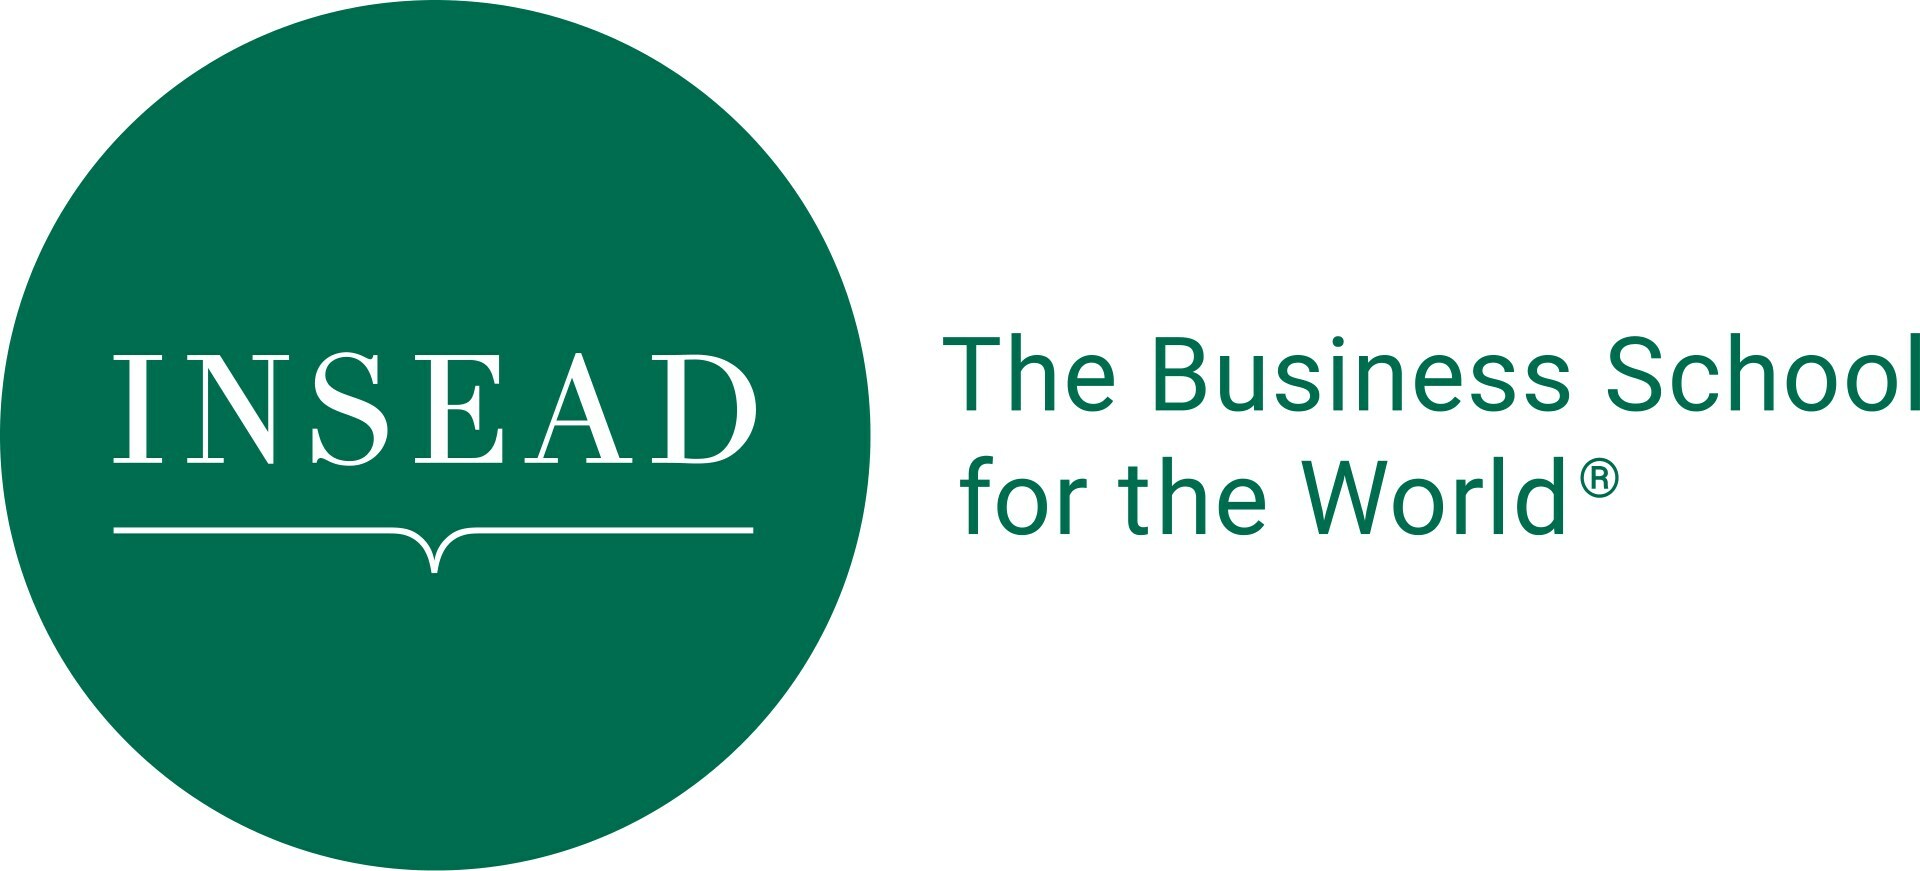 INSEAD, The Business School for the World (PRNewsfoto/INSEAD, The Business School for the World)